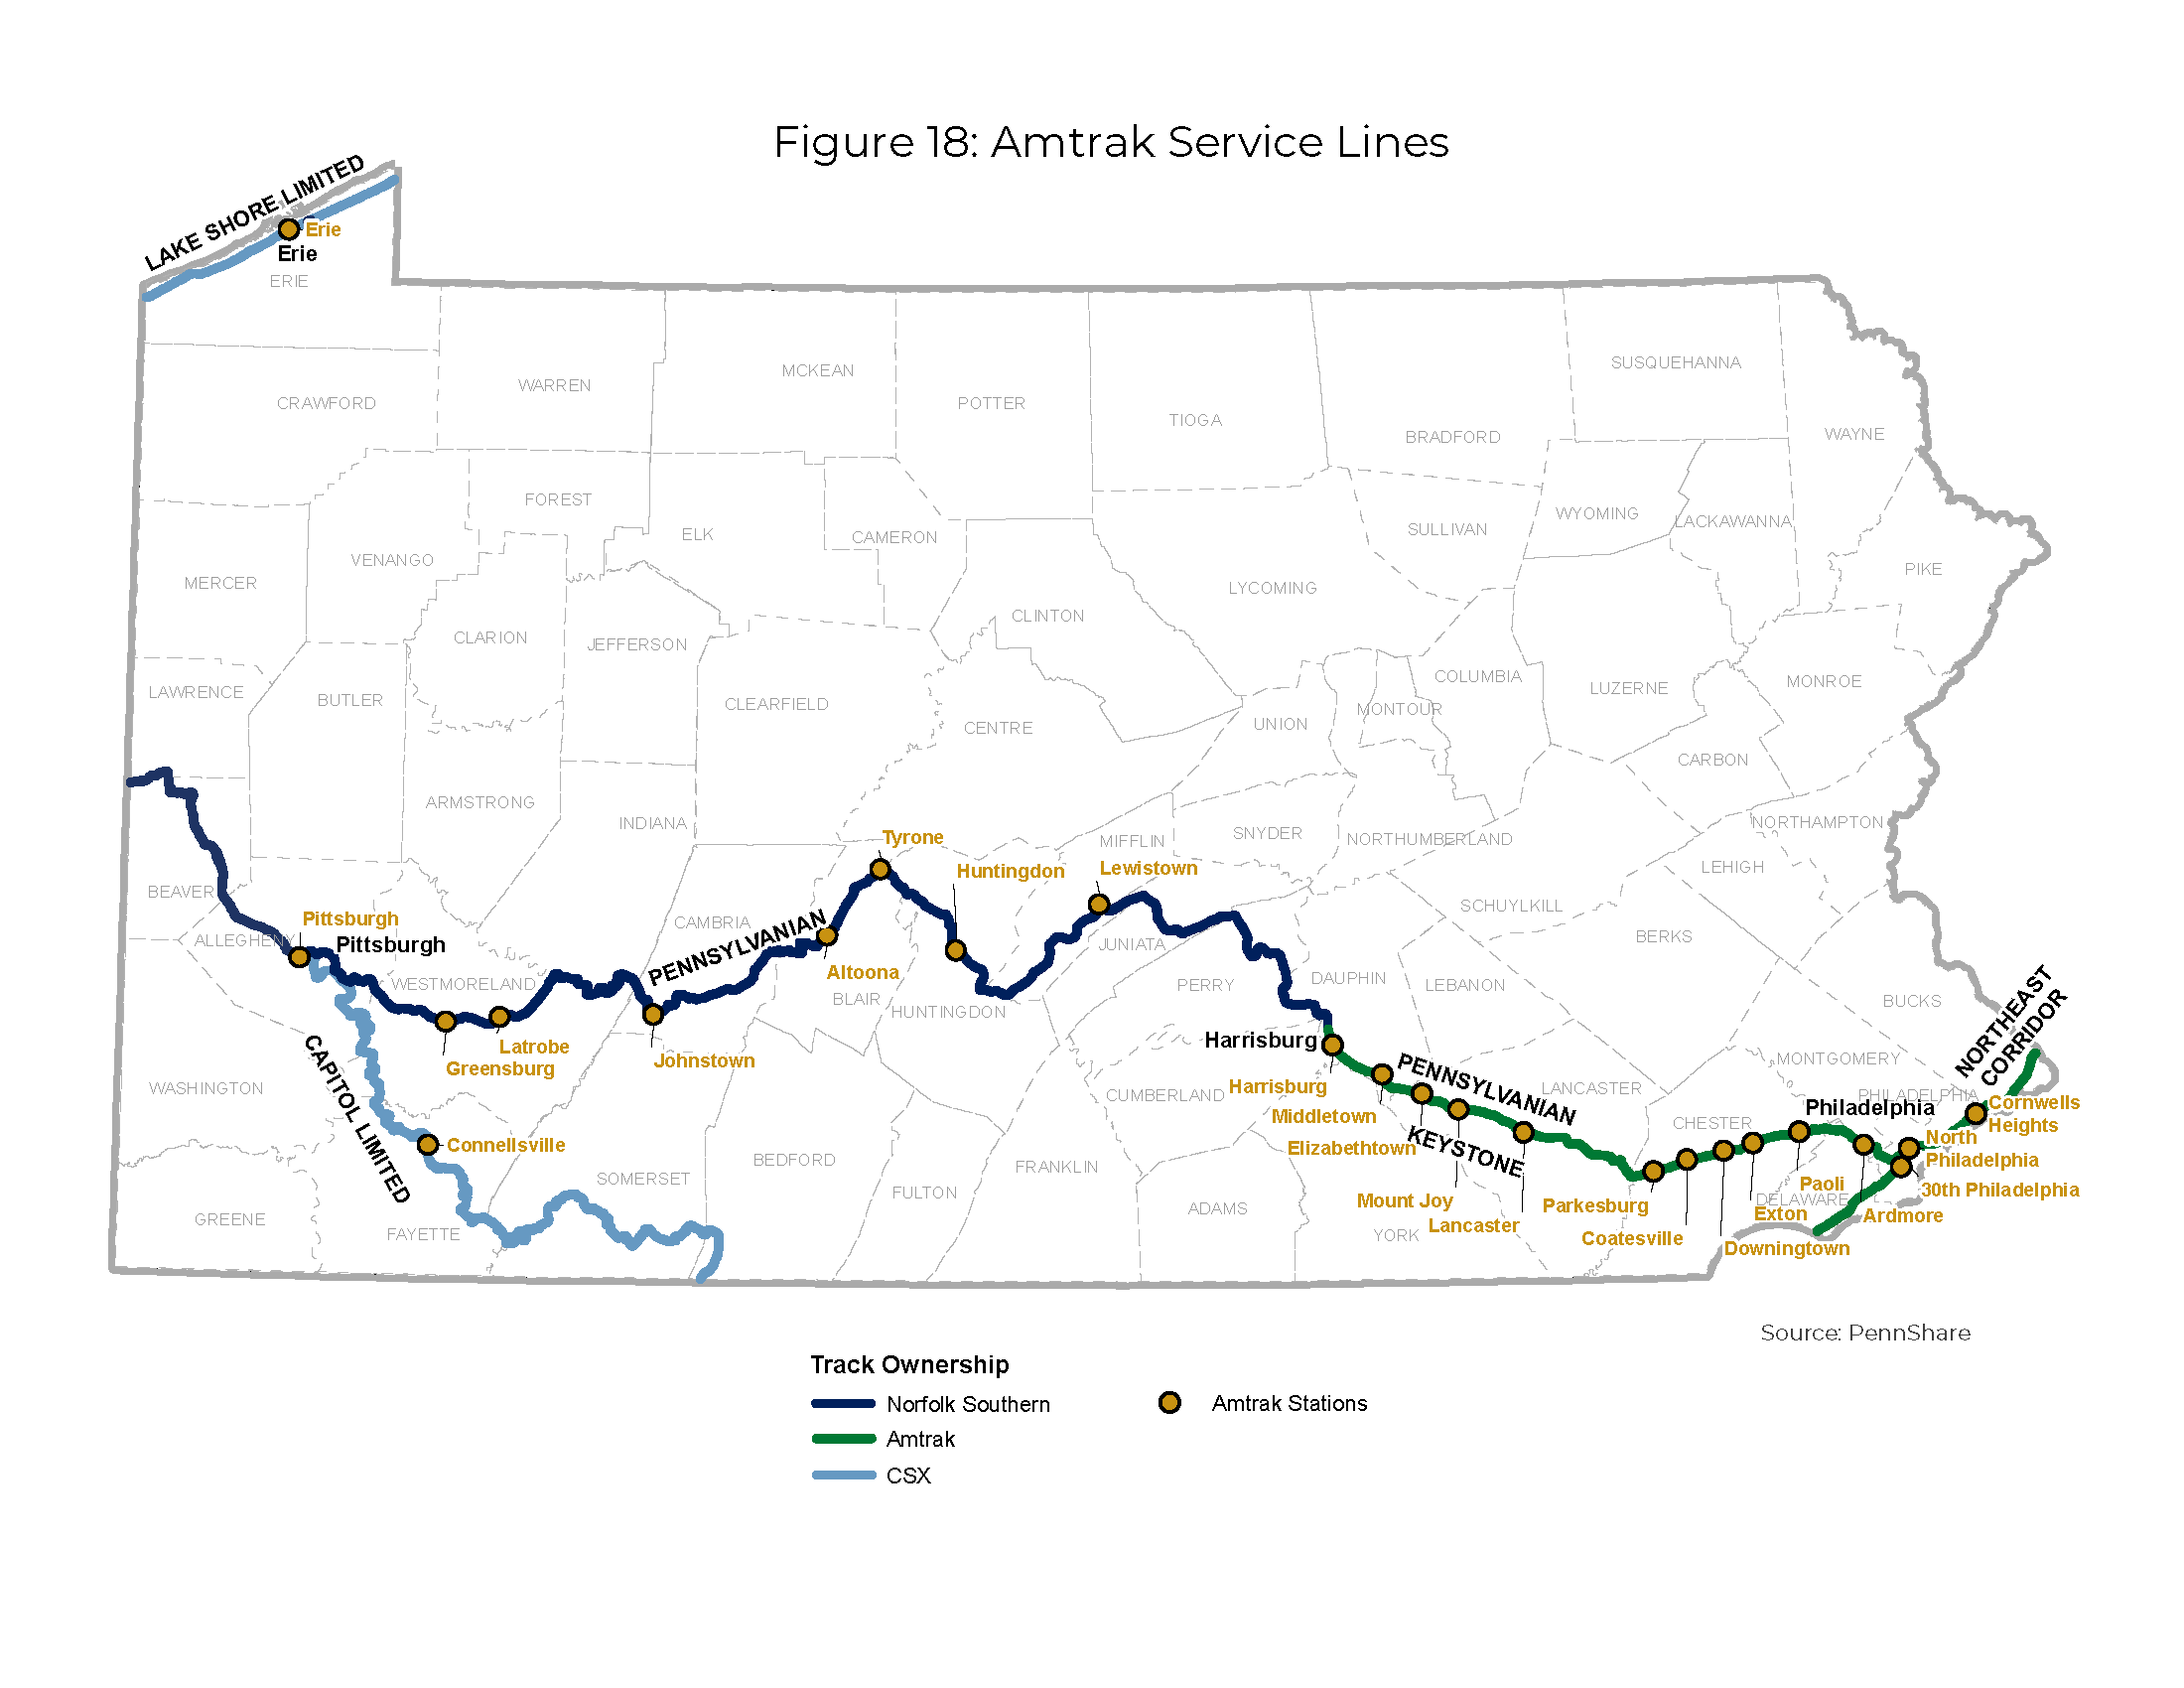 Pennsylvania state map illustrating Amtrack Service Lines and track ownership by Norfolk Southern, Amtrak, and CSX. In addition, the map includes the locations of Amtrak Stations.